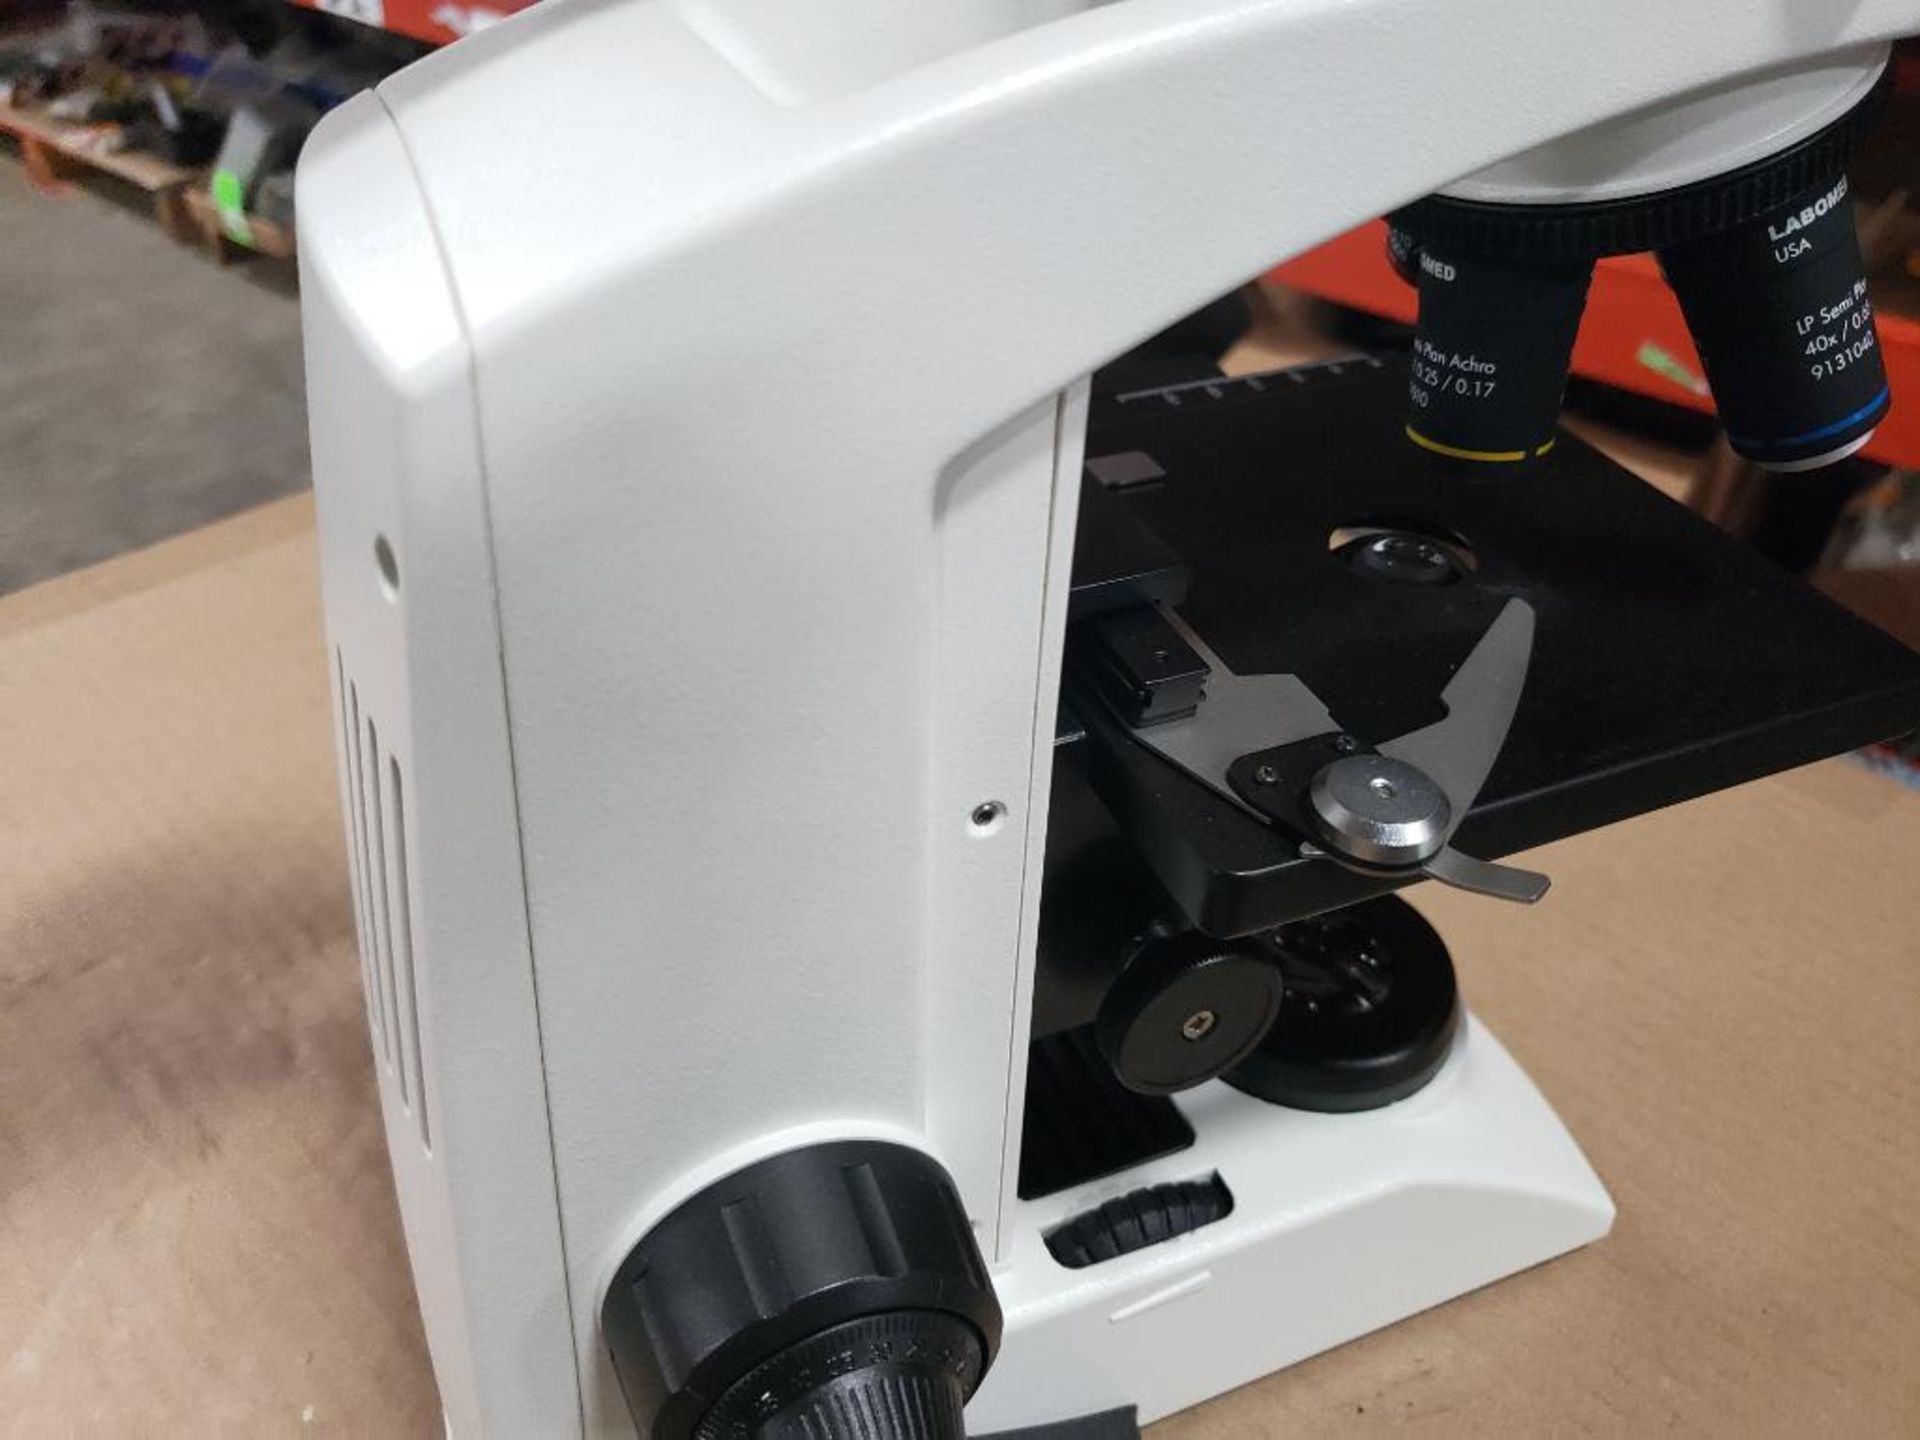 Labomed CxL 9961 microscope. - Image 6 of 8